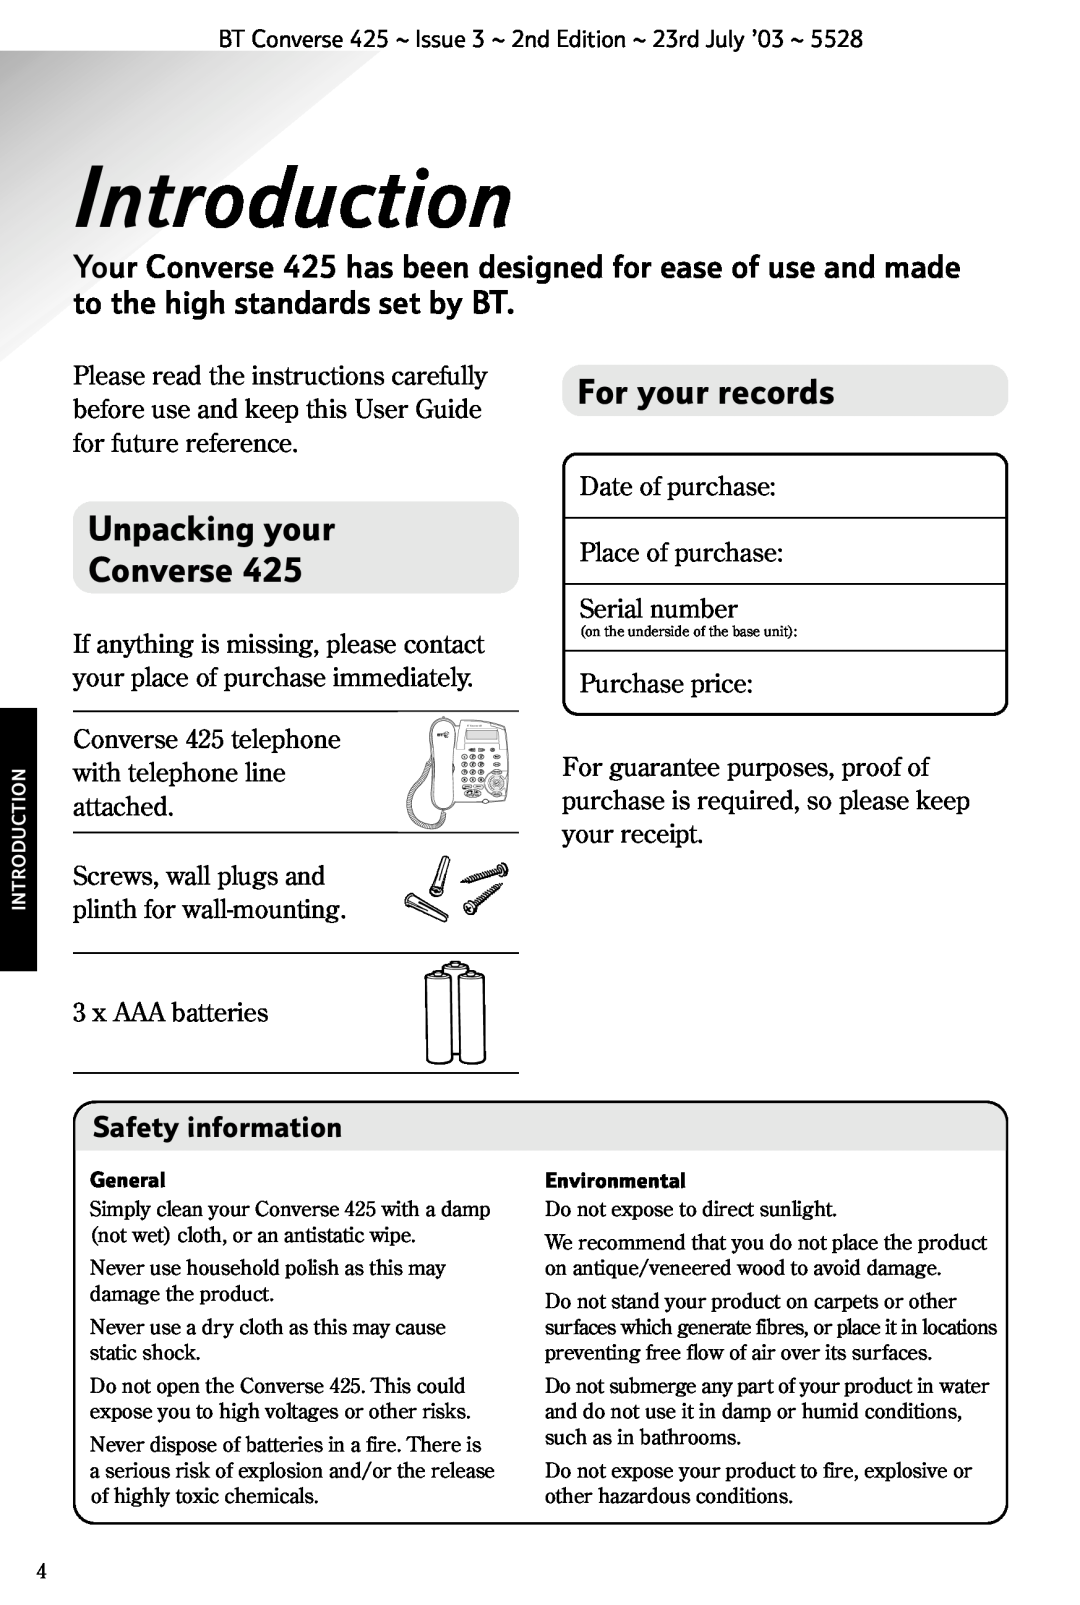 BT 425 manual Introduction, Unpacking your Converse, For your records, Safety information 